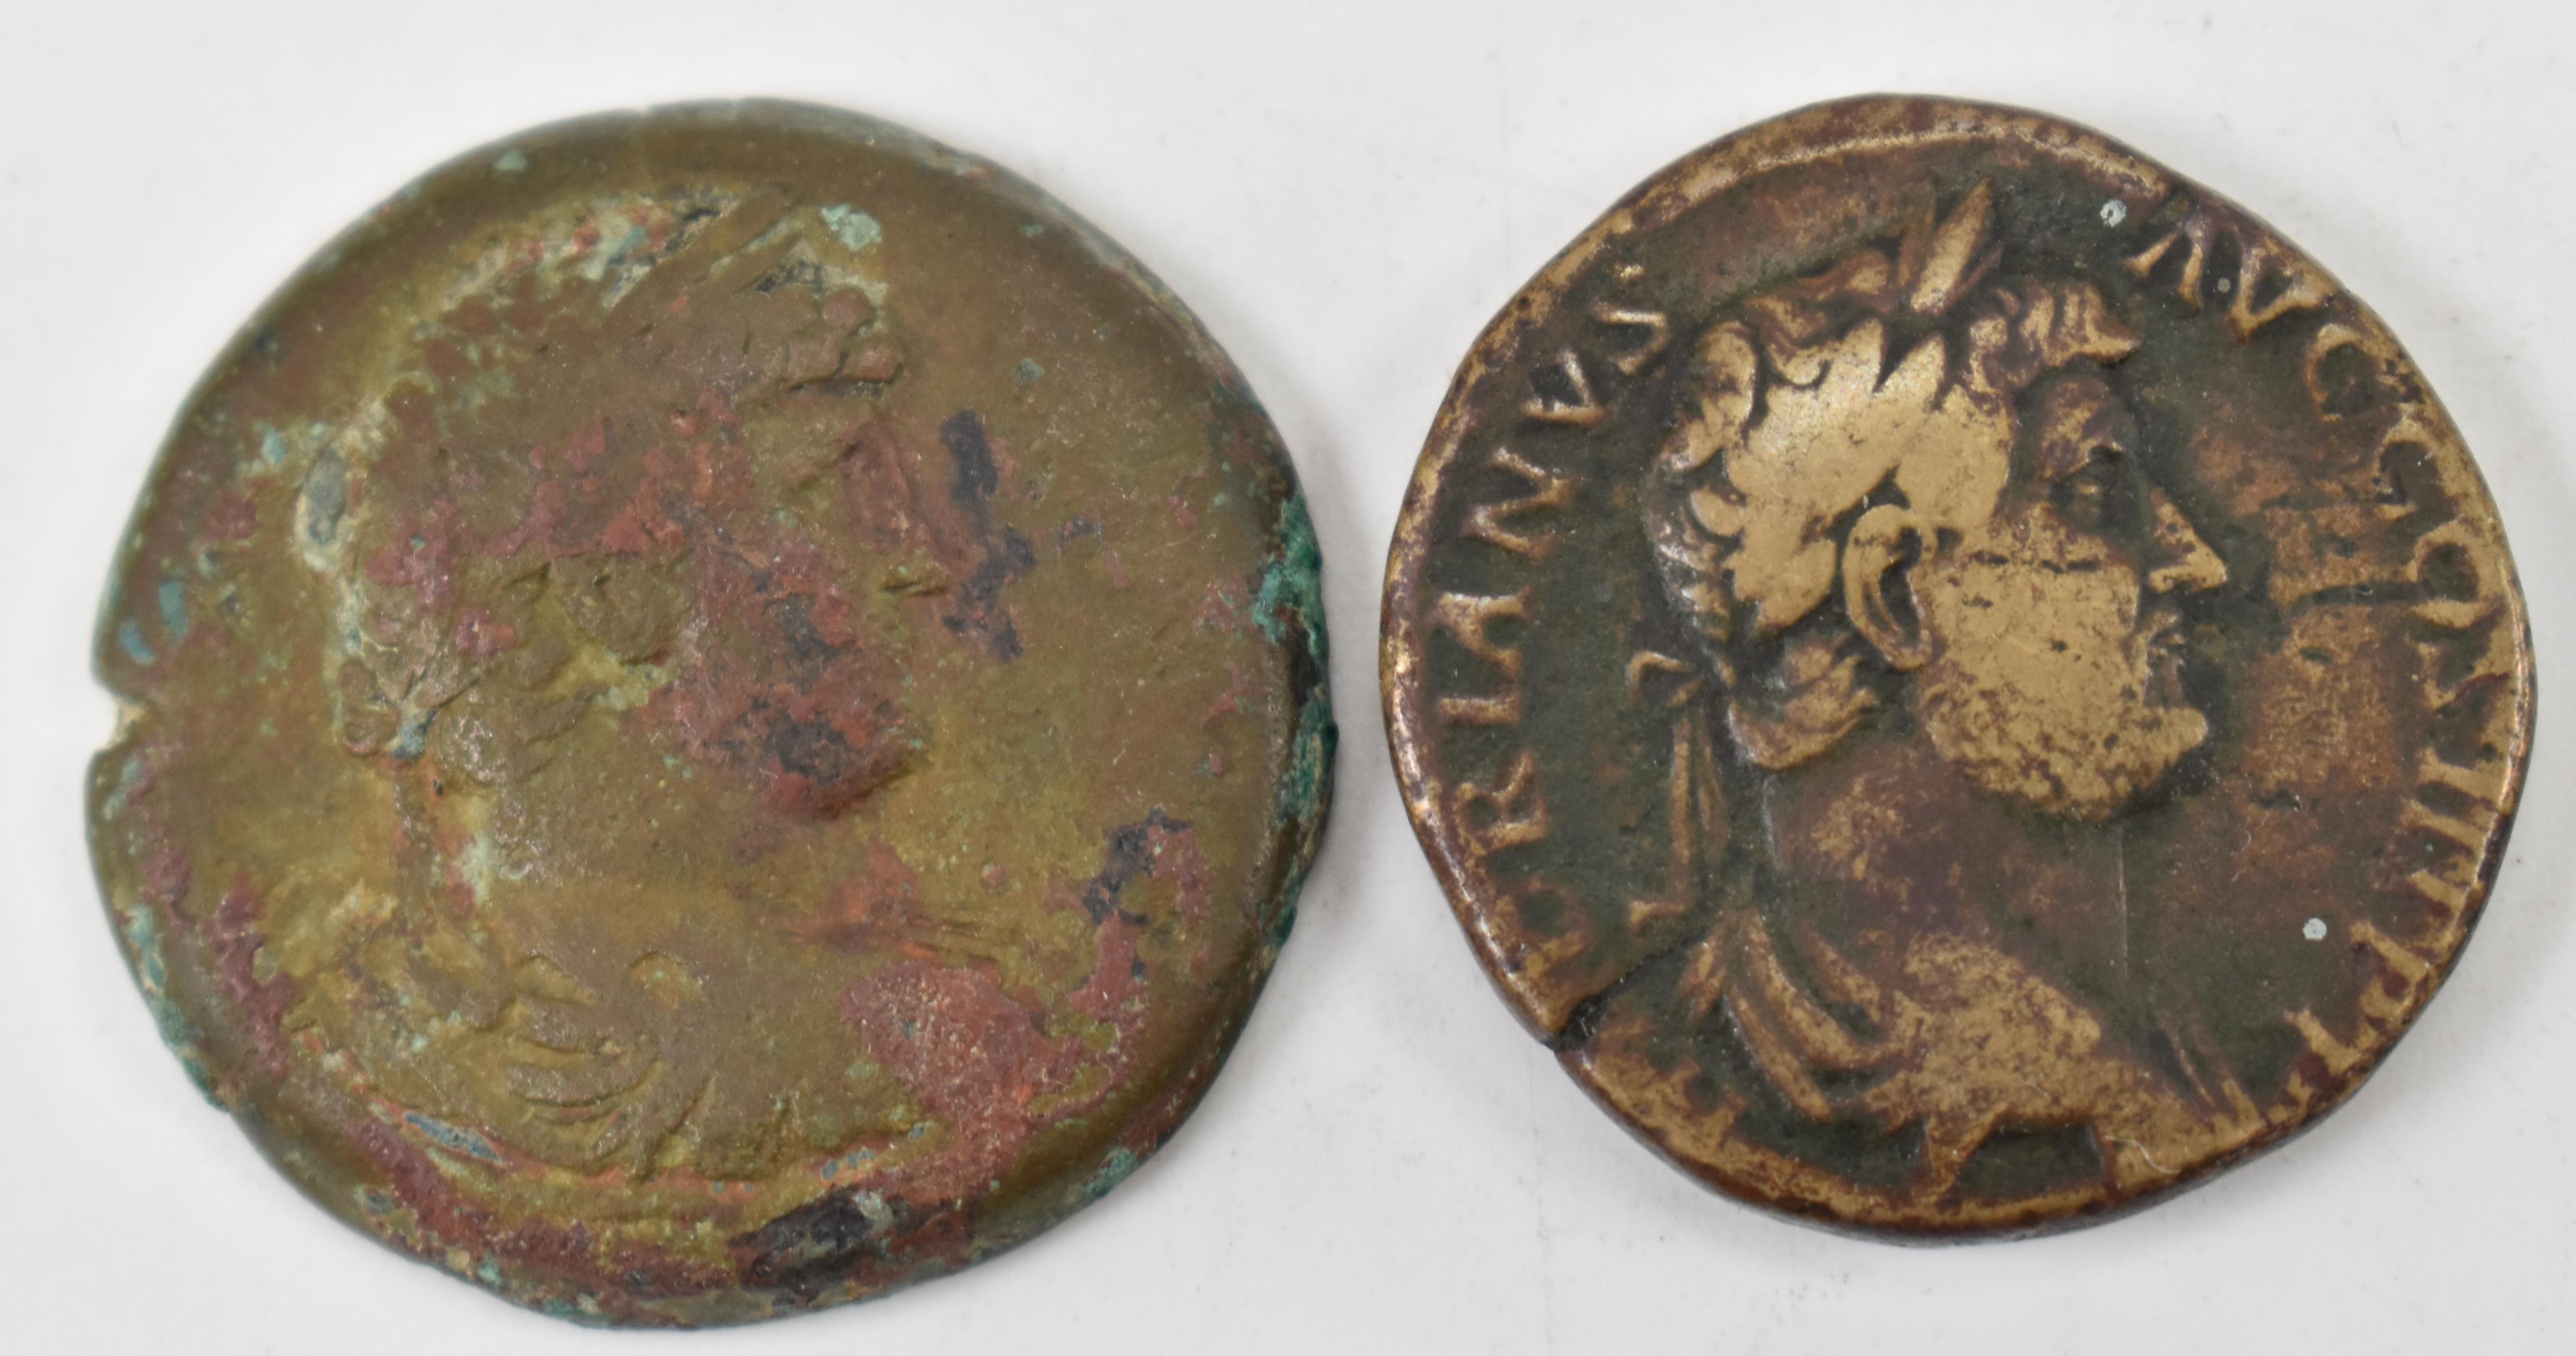 TWO ANCIENT ROMAN IMPERIAL COINS FROM THE REIGN OF HADRIAN